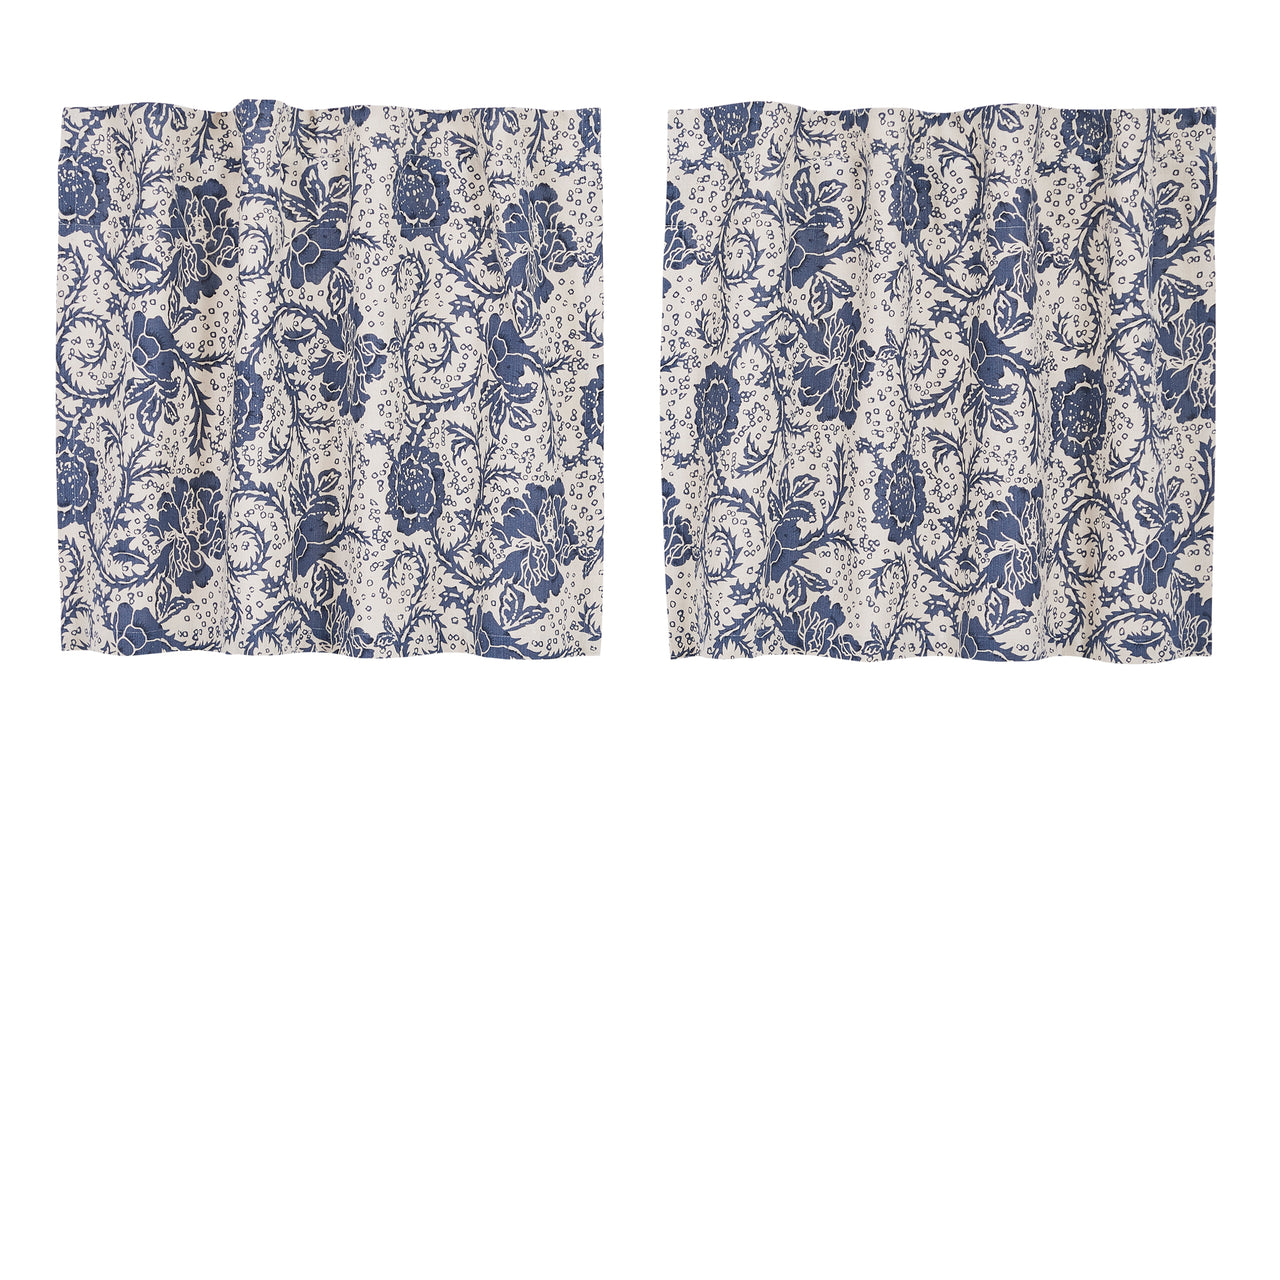 Dorset Navy Floral Tier Curtain Set of 2 L24xW36 VHC Brands